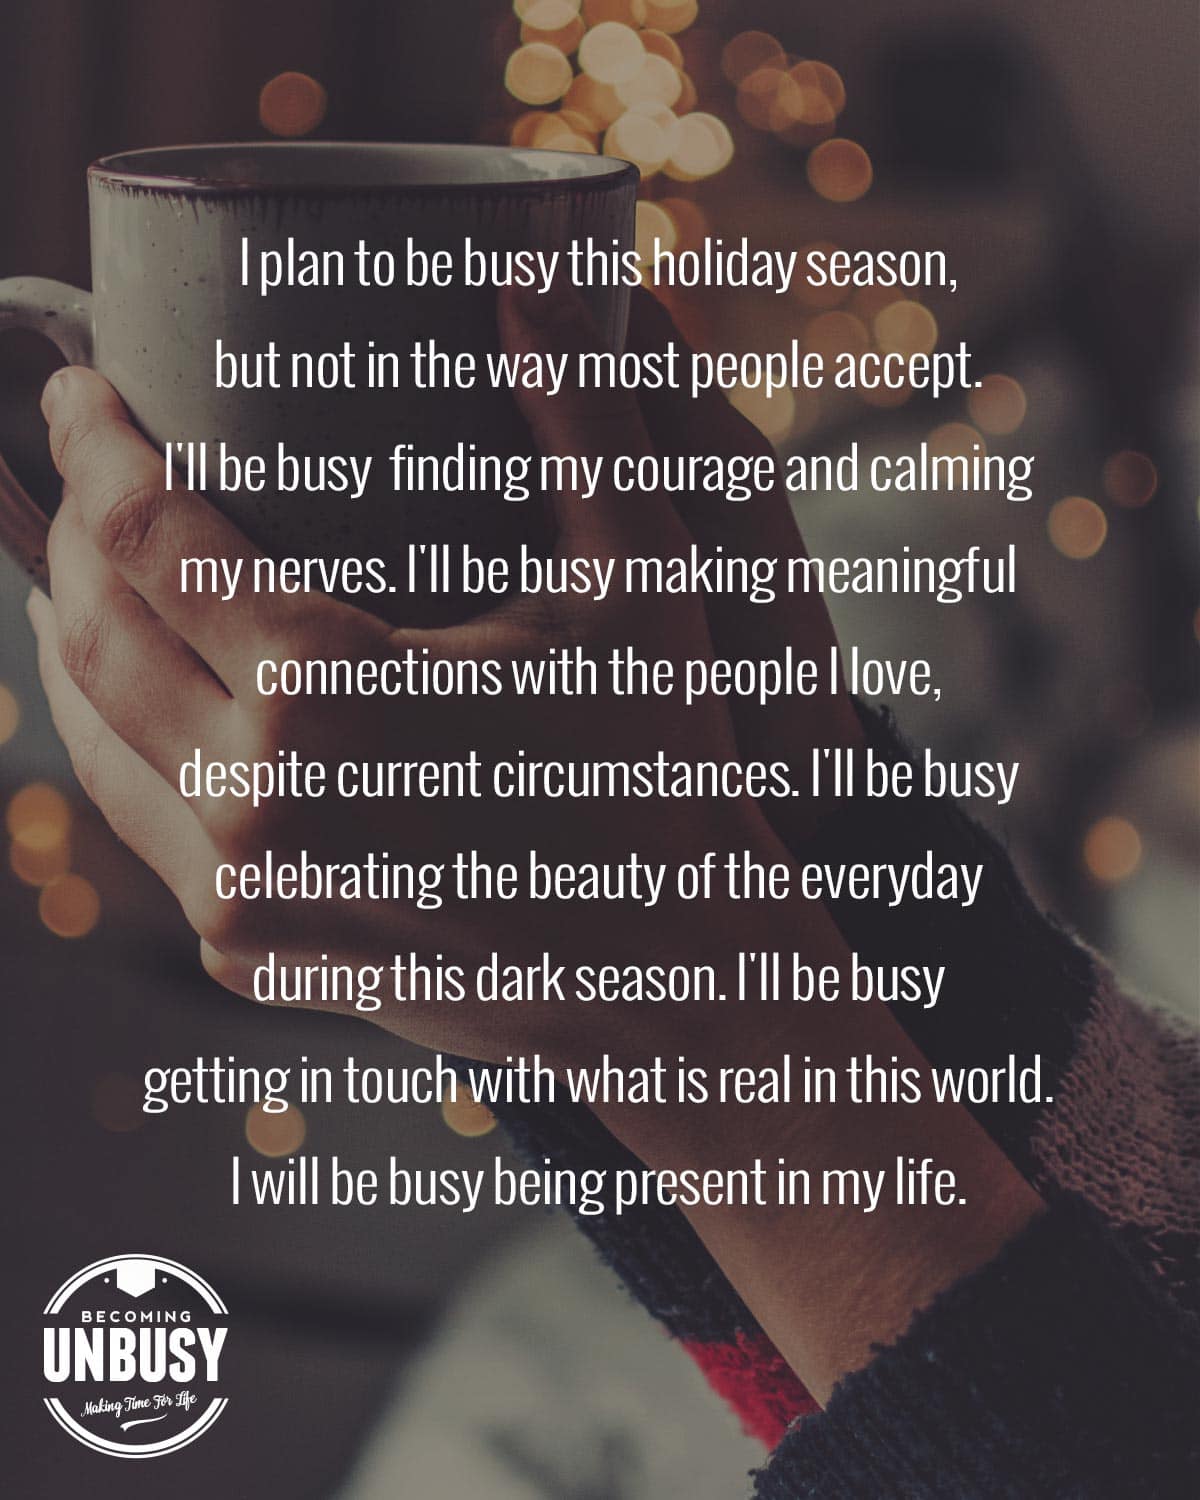 A woman enjoying the JOMO, holding a coffee cup with holiday lights behind her. The following quote is overtop the image, "I plan to be busy this holiday season, but not in the way most people accept. I'll be busy finding my courage and calming my nerves. I'll be busy making meaningful connections with the people I love, despite current circumstances. I'll be busy celebrating the beauty of the everyday during this dark season. I'll be busy getting in touch with what is real in this world. I will be busy being present in my life."